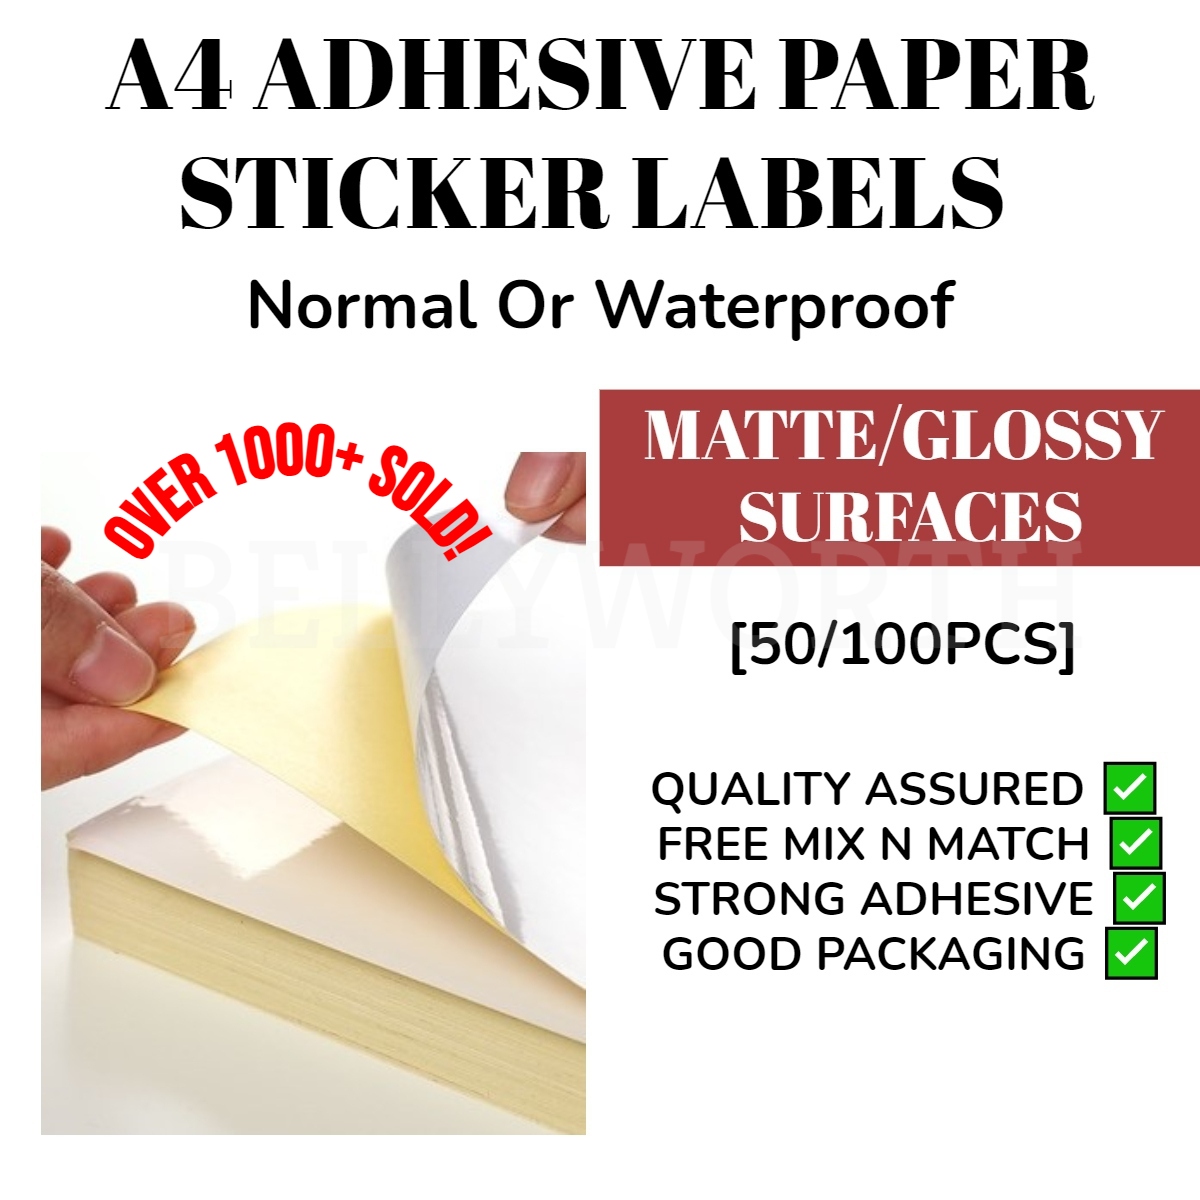 100ml Auto Car Sticker Remover Sticky Residue Remover Wall Sticker Glue  Removal Car Glass Label Cleaner Adhesive Glue Spray